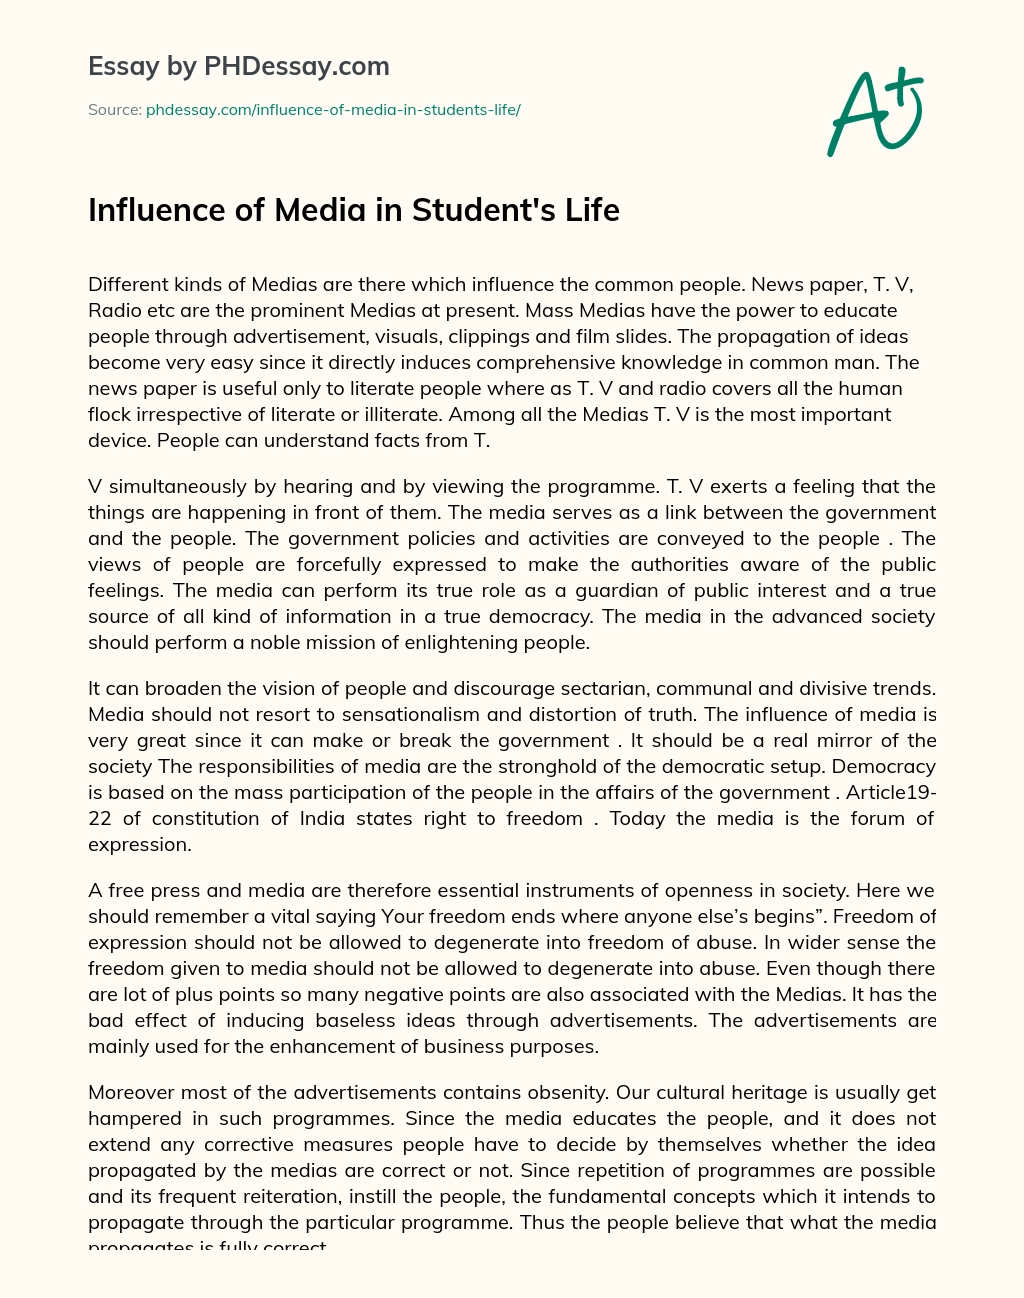 the influence of media on students